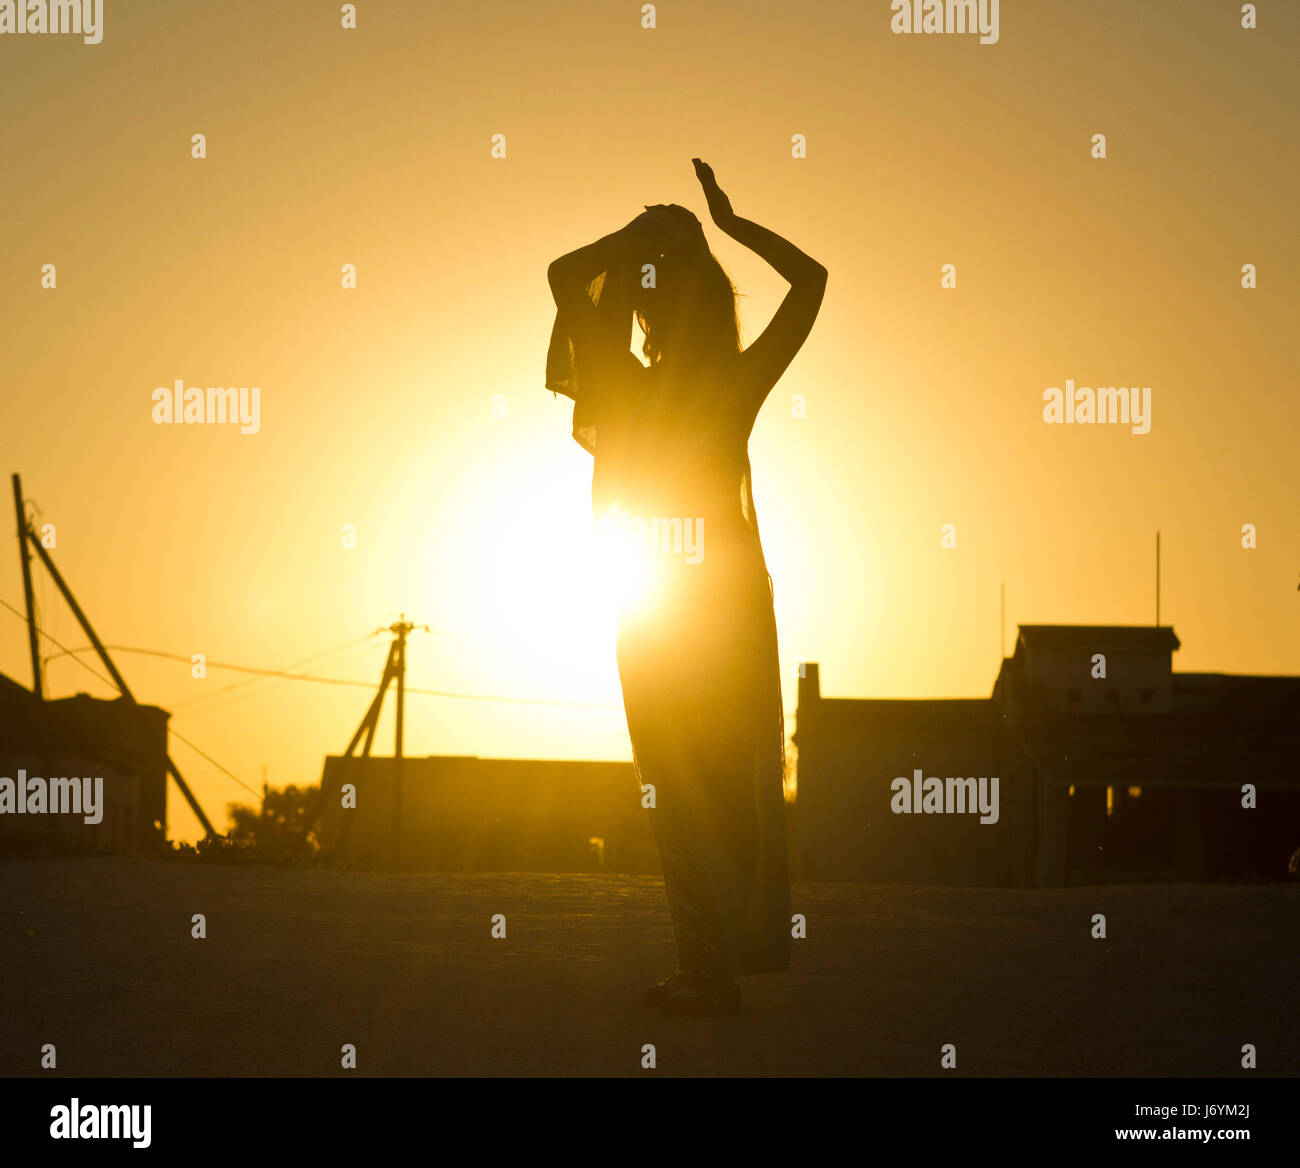 girl's silhouette against the sun at sunset Stock Photo